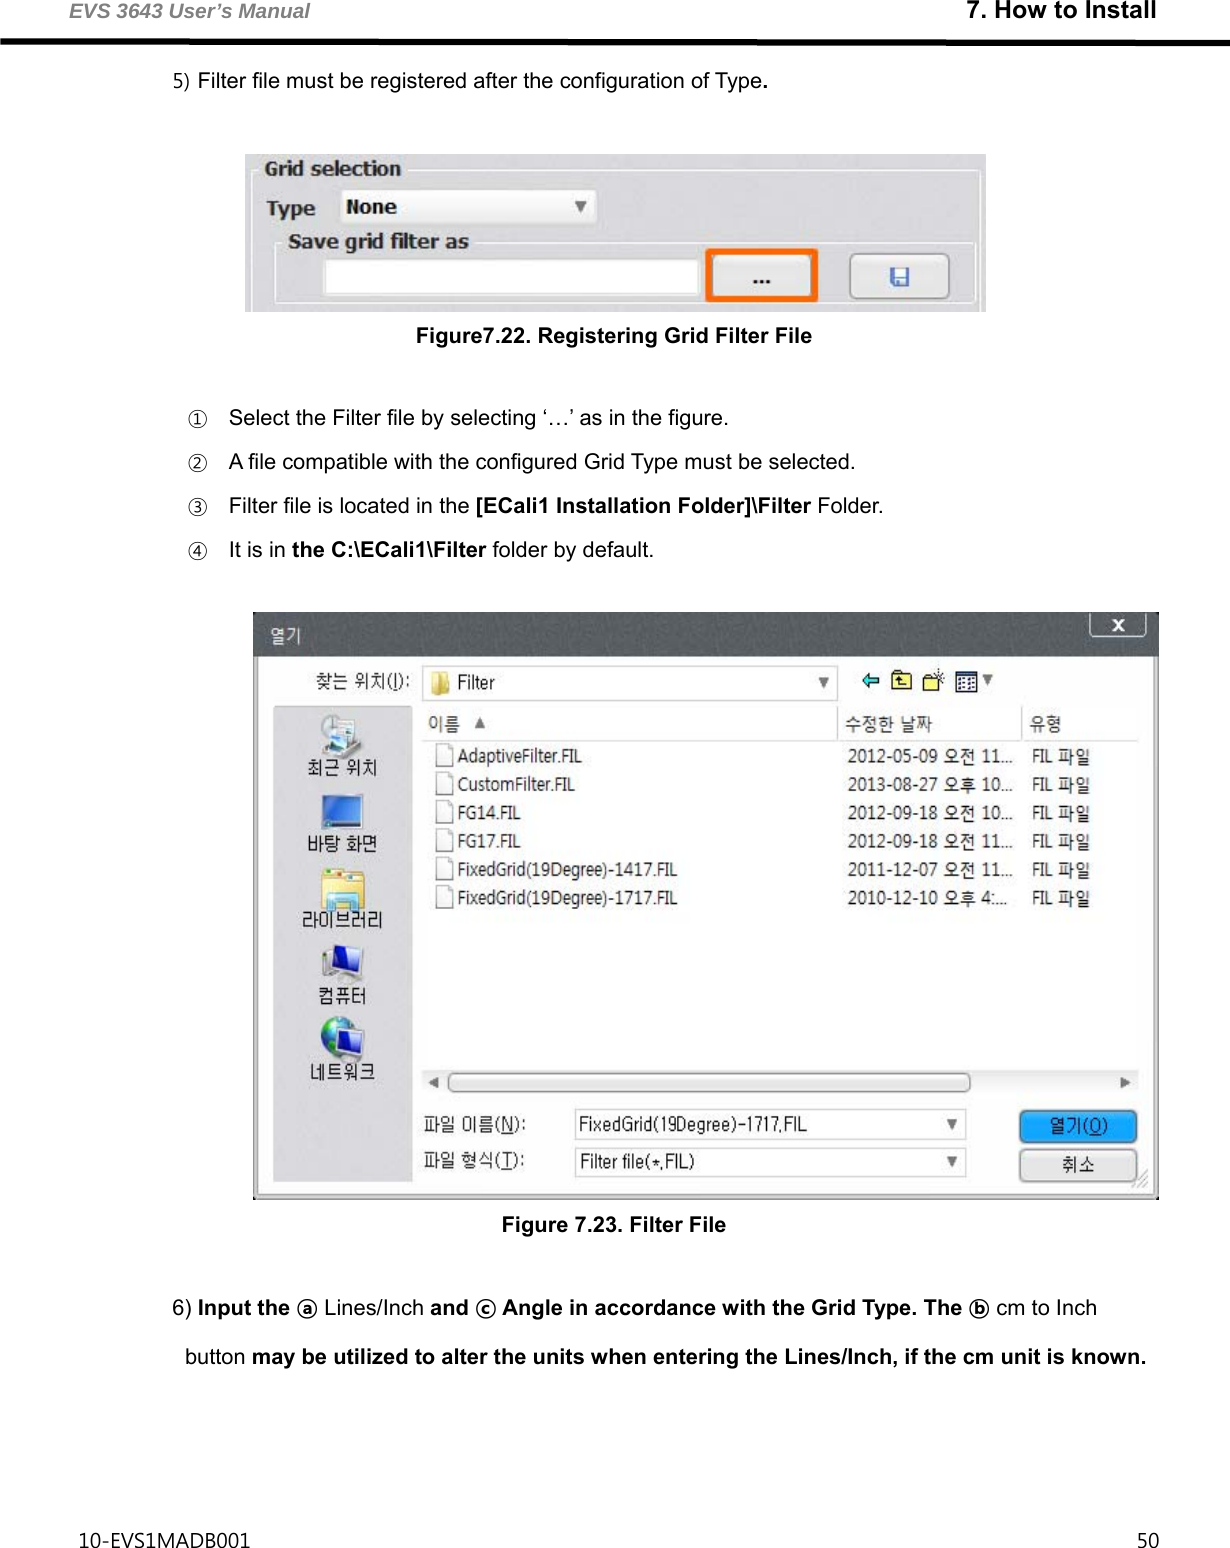 EVS 3643 User’s Manual                                                               7. How to Install 10-EVS1MADB001                                                                                     50  5) Filter file must be registered after the configuration of Type.   Figure7.22. Registering Grid Filter File  ① Select the Filter file by selecting ‘…’ as in the figure. ② A file compatible with the configured Grid Type must be selected. ③ Filter file is located in the [ECali1 Installation Folder]\Filter Folder. ④ It is in the C:\ECali1\Filter folder by default.   Figure 7.23. Filter File  6) Input the ⓐ Lines/Inch and ⓒ Angle in accordance with the Grid Type. The ⓑ cm to Inch button may be utilized to alter the units when entering the Lines/Inch, if the cm unit is known.    